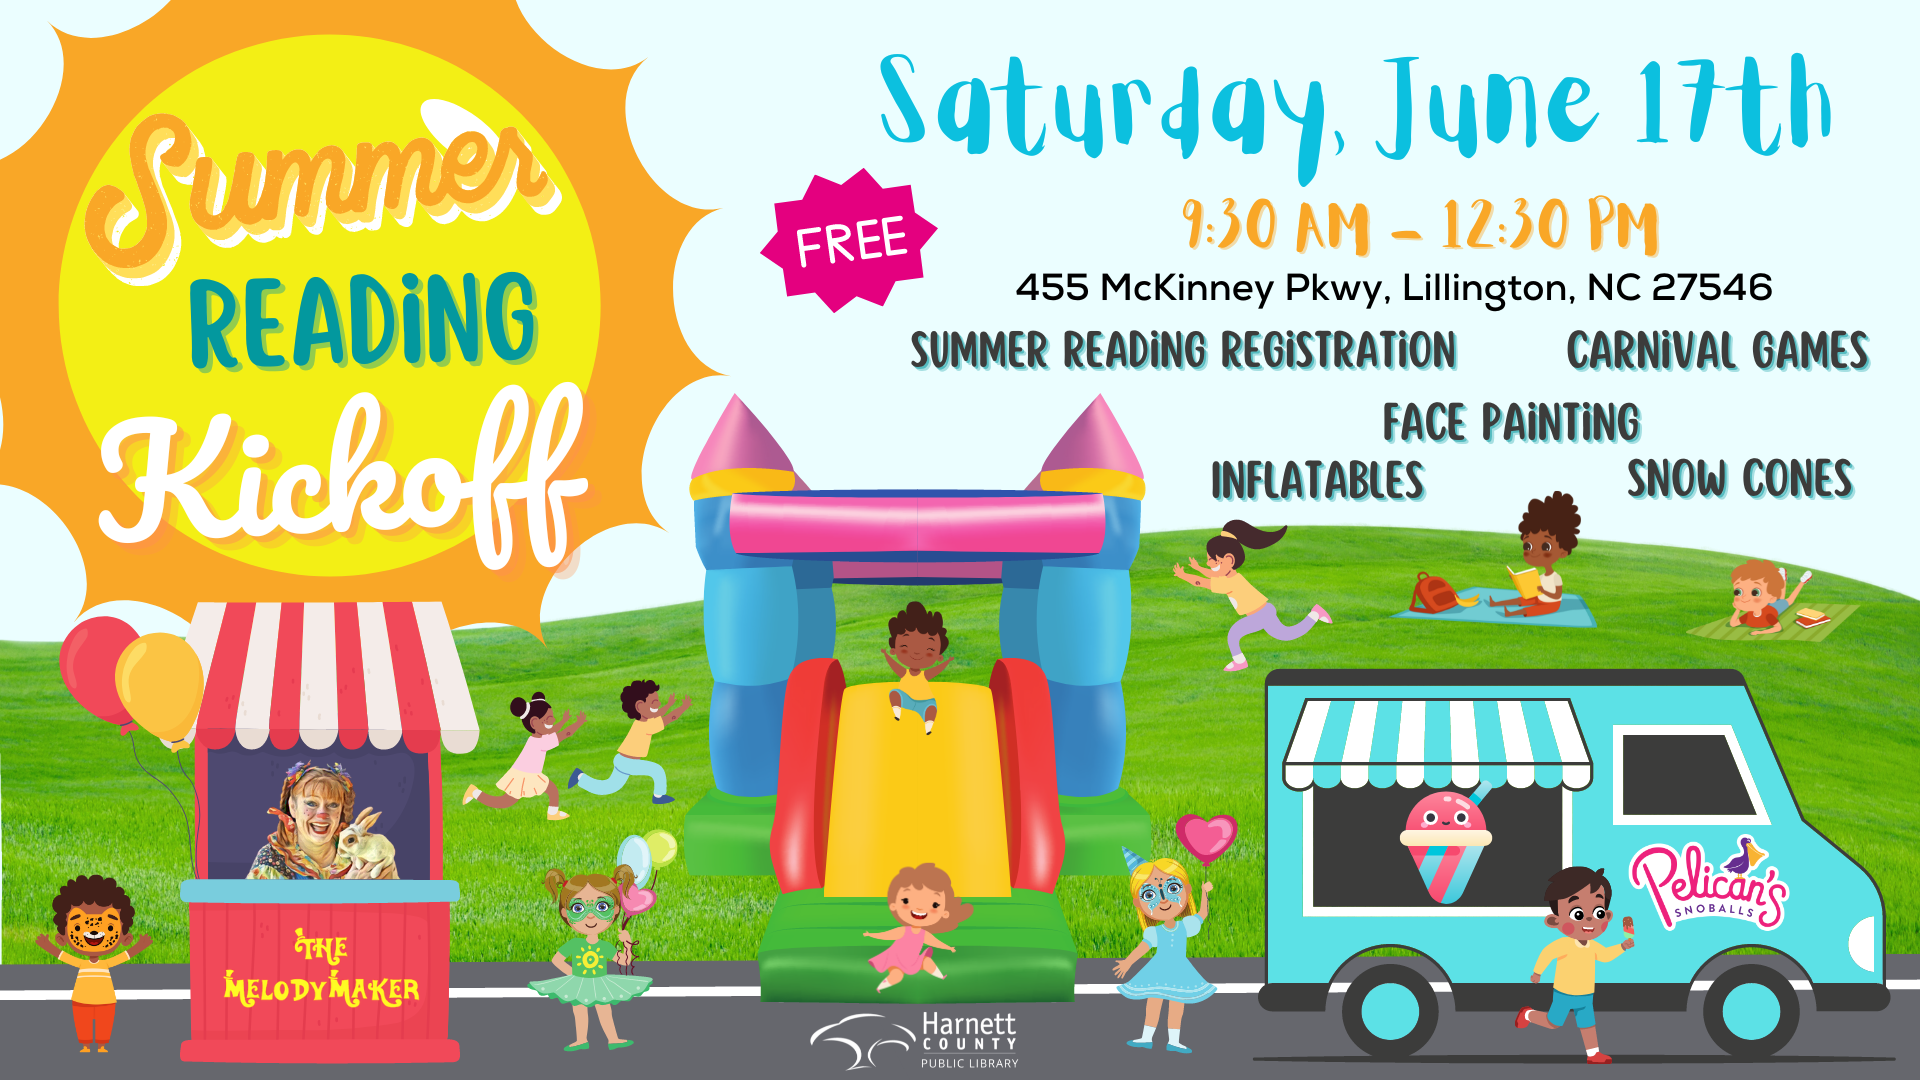 Image of the flyer promoting the Summer Reading Kickoff event